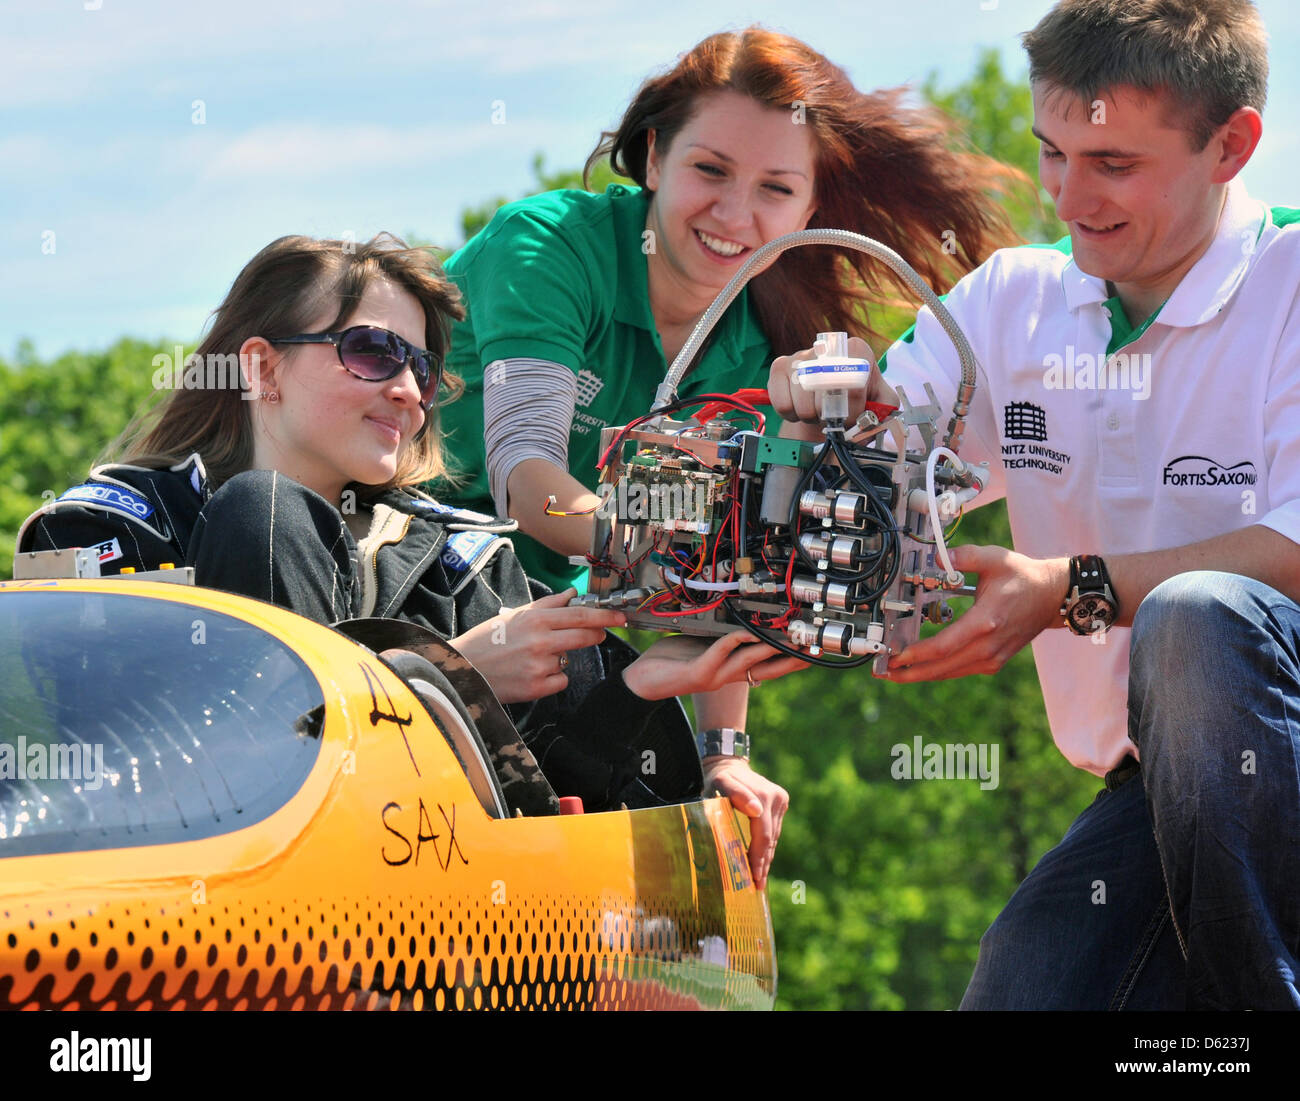 Students Christine (L-R), Anetta and Nico from team Fortis Saxonia of the University of Applied Sciences Chemnitz prepare a test run of their eco-mobile SAX4 in Chemnitz, Germany, 10 May 2012. The students and their futuristic vehicle will take part in the Shell Eco-marathon in Rotterdam from 17 till 19 May 2012. The biggest competition for susatinable mobility inm Europe attracts  Stock Photo